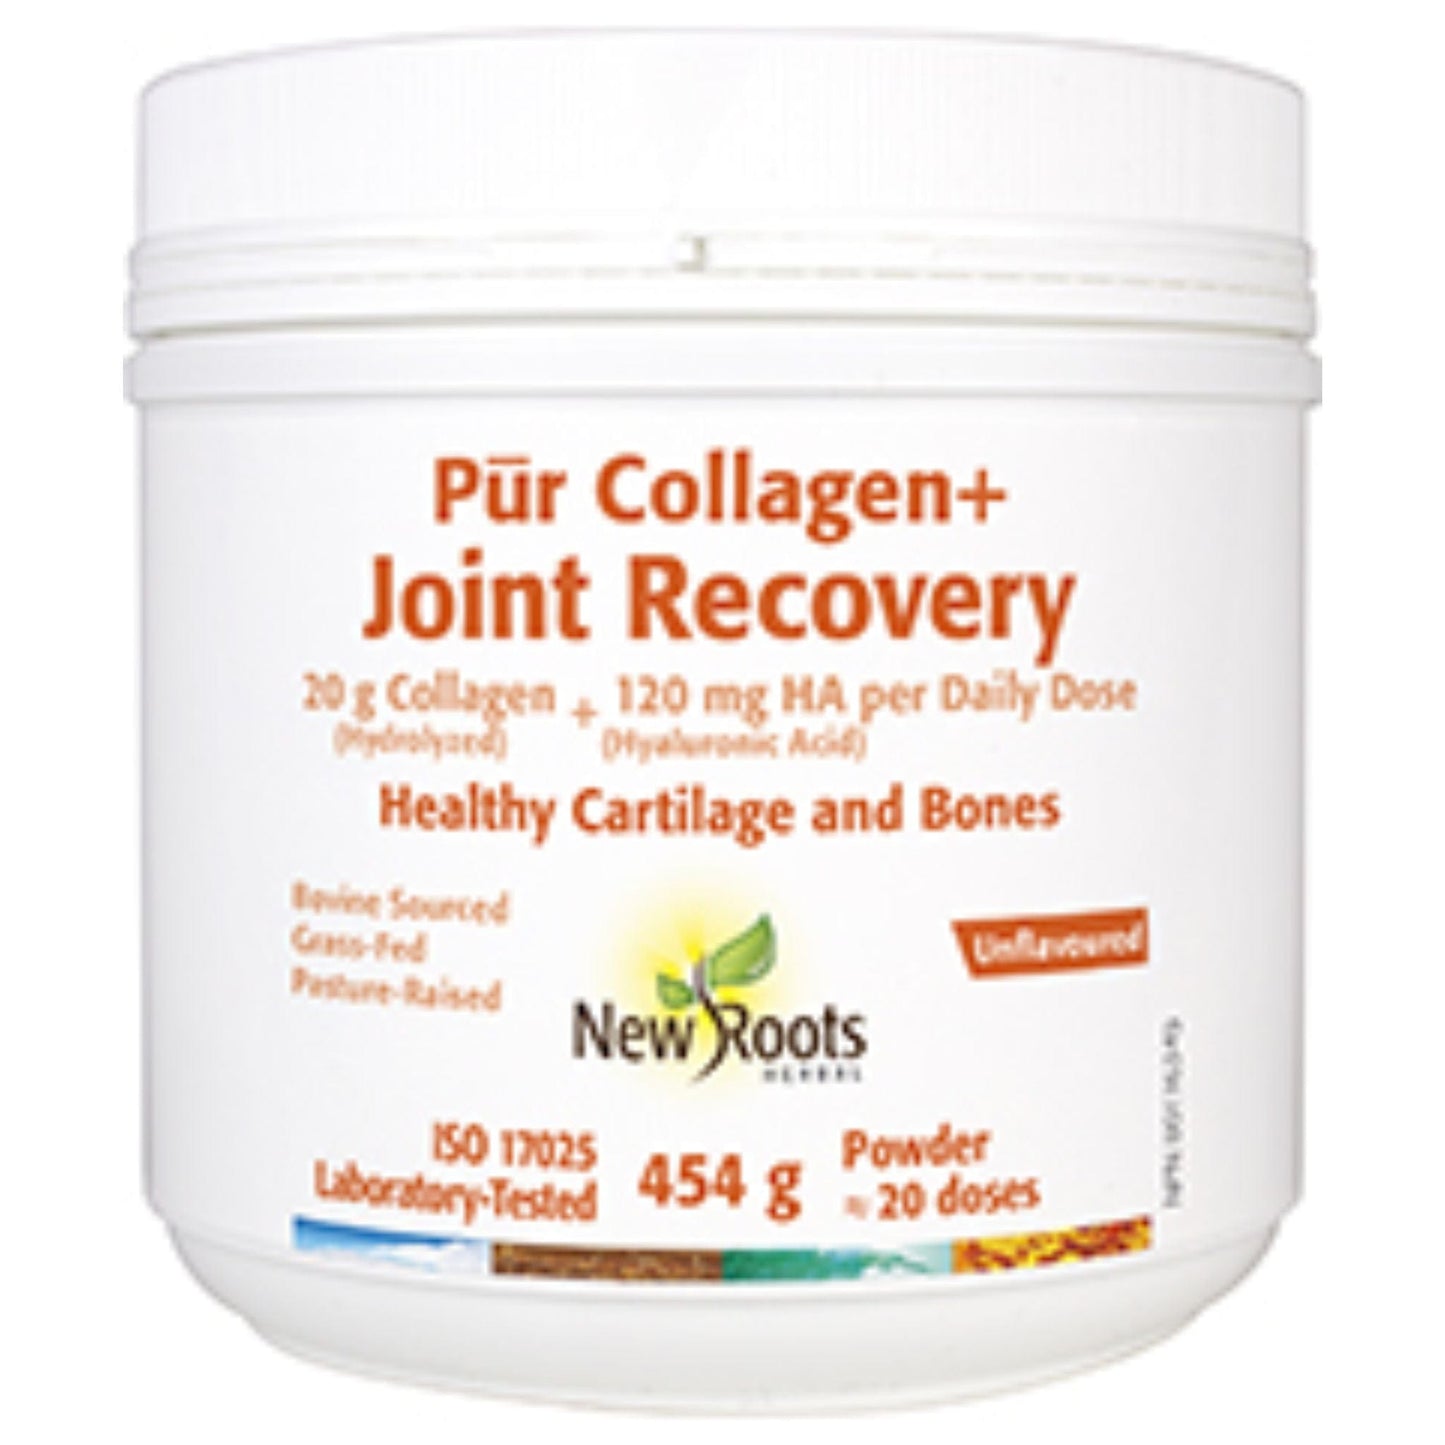 New Roots Pur Collagen+ Joint Recovery,  Collagen, Hyaluronic acid, Vitamin C, 454g